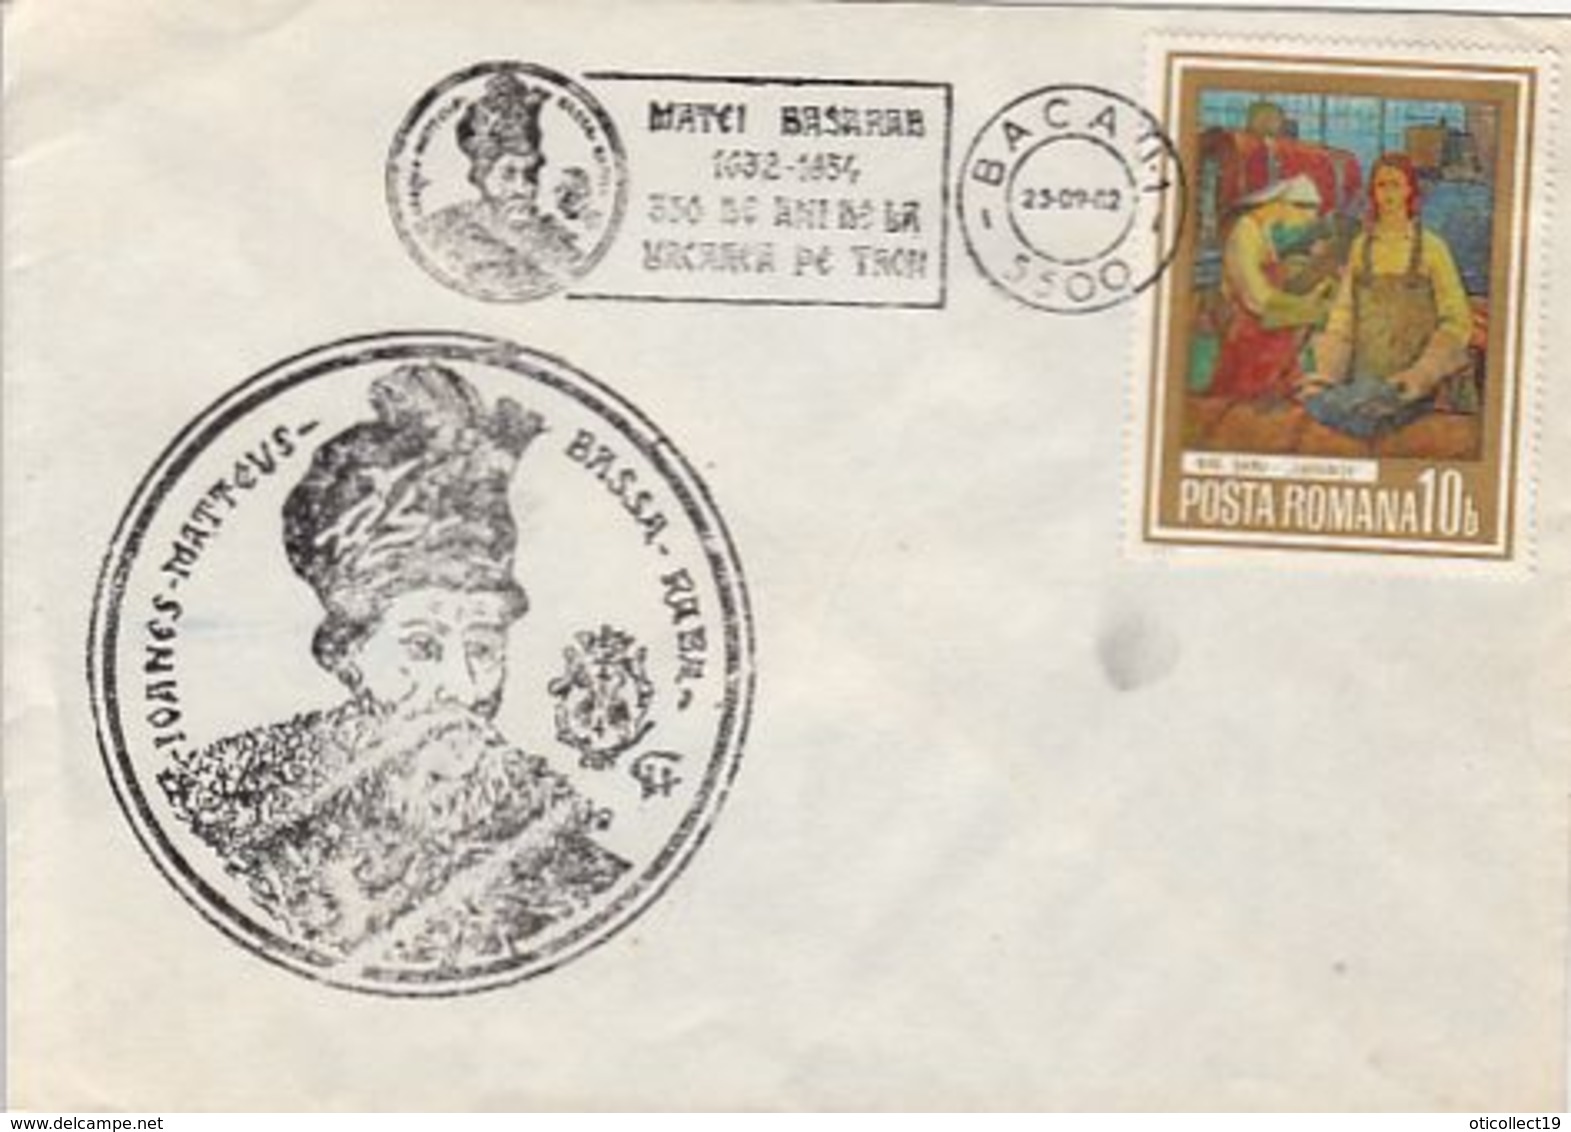 KING MATEI BASARAB OF WALLACHIA, SPECIAL COVER, 1982, ROMANIA - Lettres & Documents